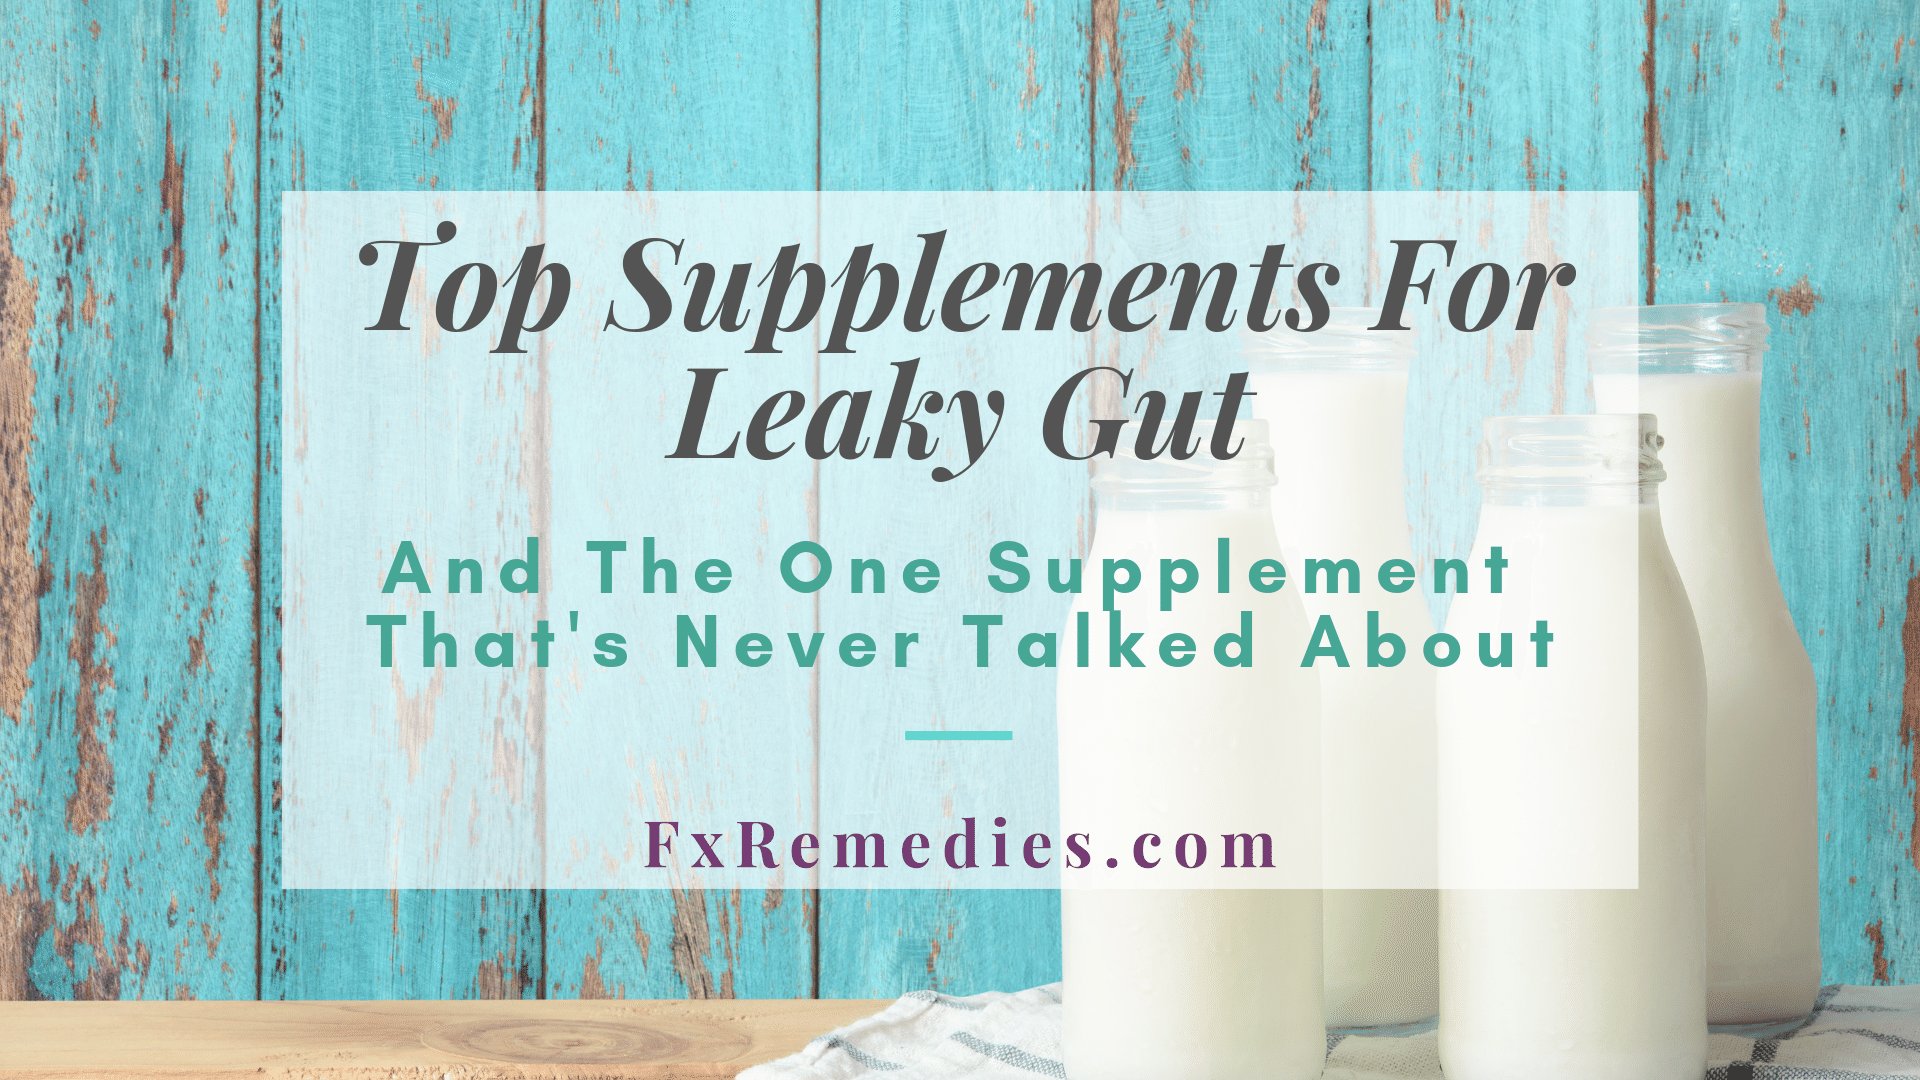 These top supplements for leaky gut can help you heal and improve your gut health. If you are having issues, here are my suggestions on improving digestive health.